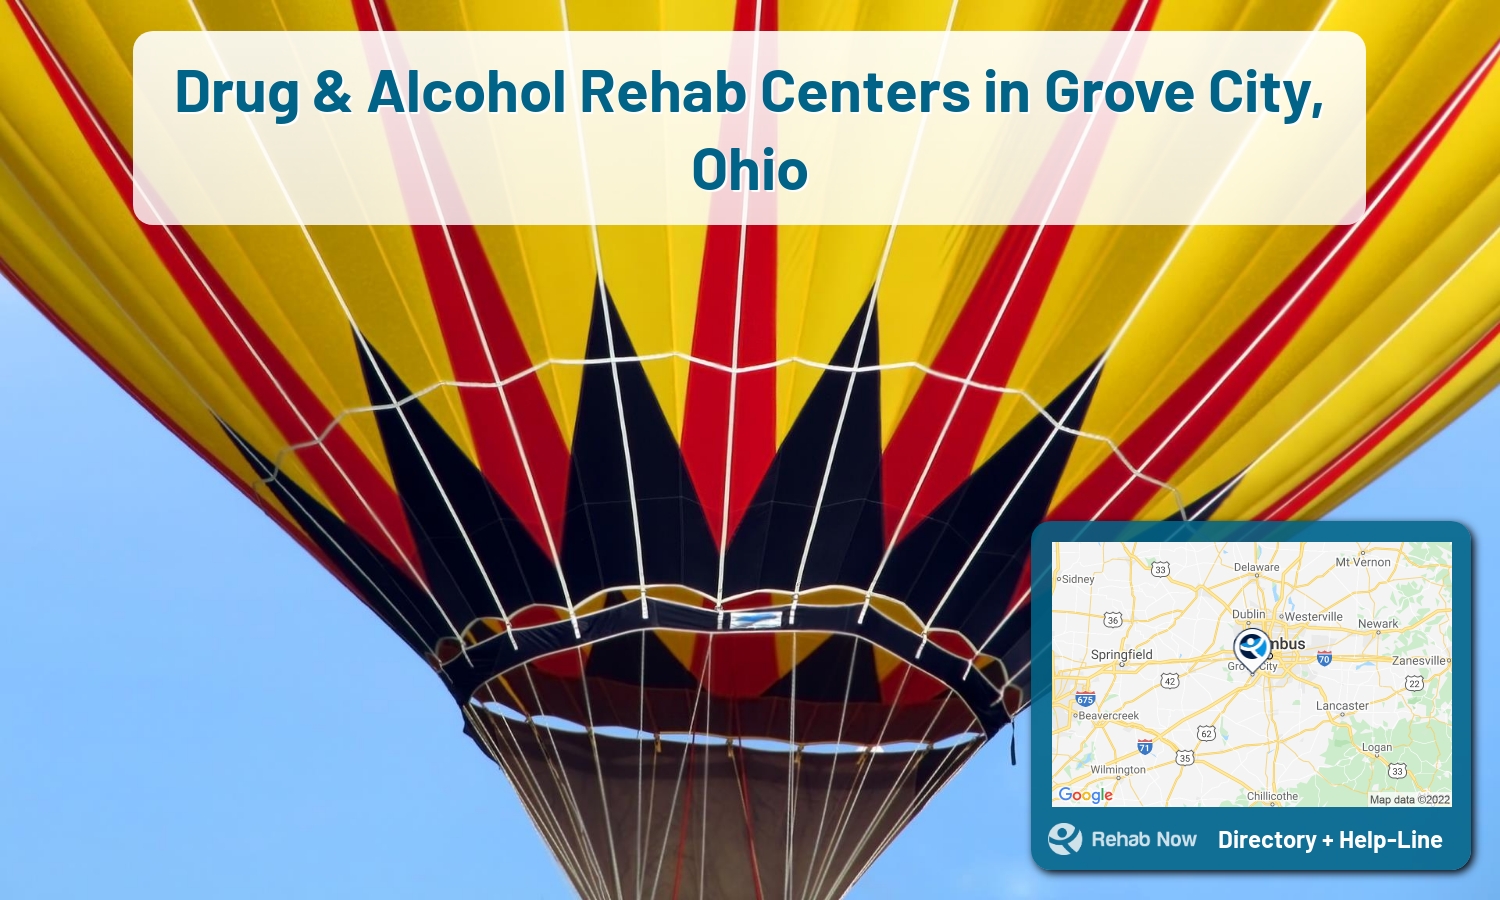 Grove City, OH Treatment Centers. Find drug rehab in Grove City, Ohio, or detox and treatment programs. Get the right help now!